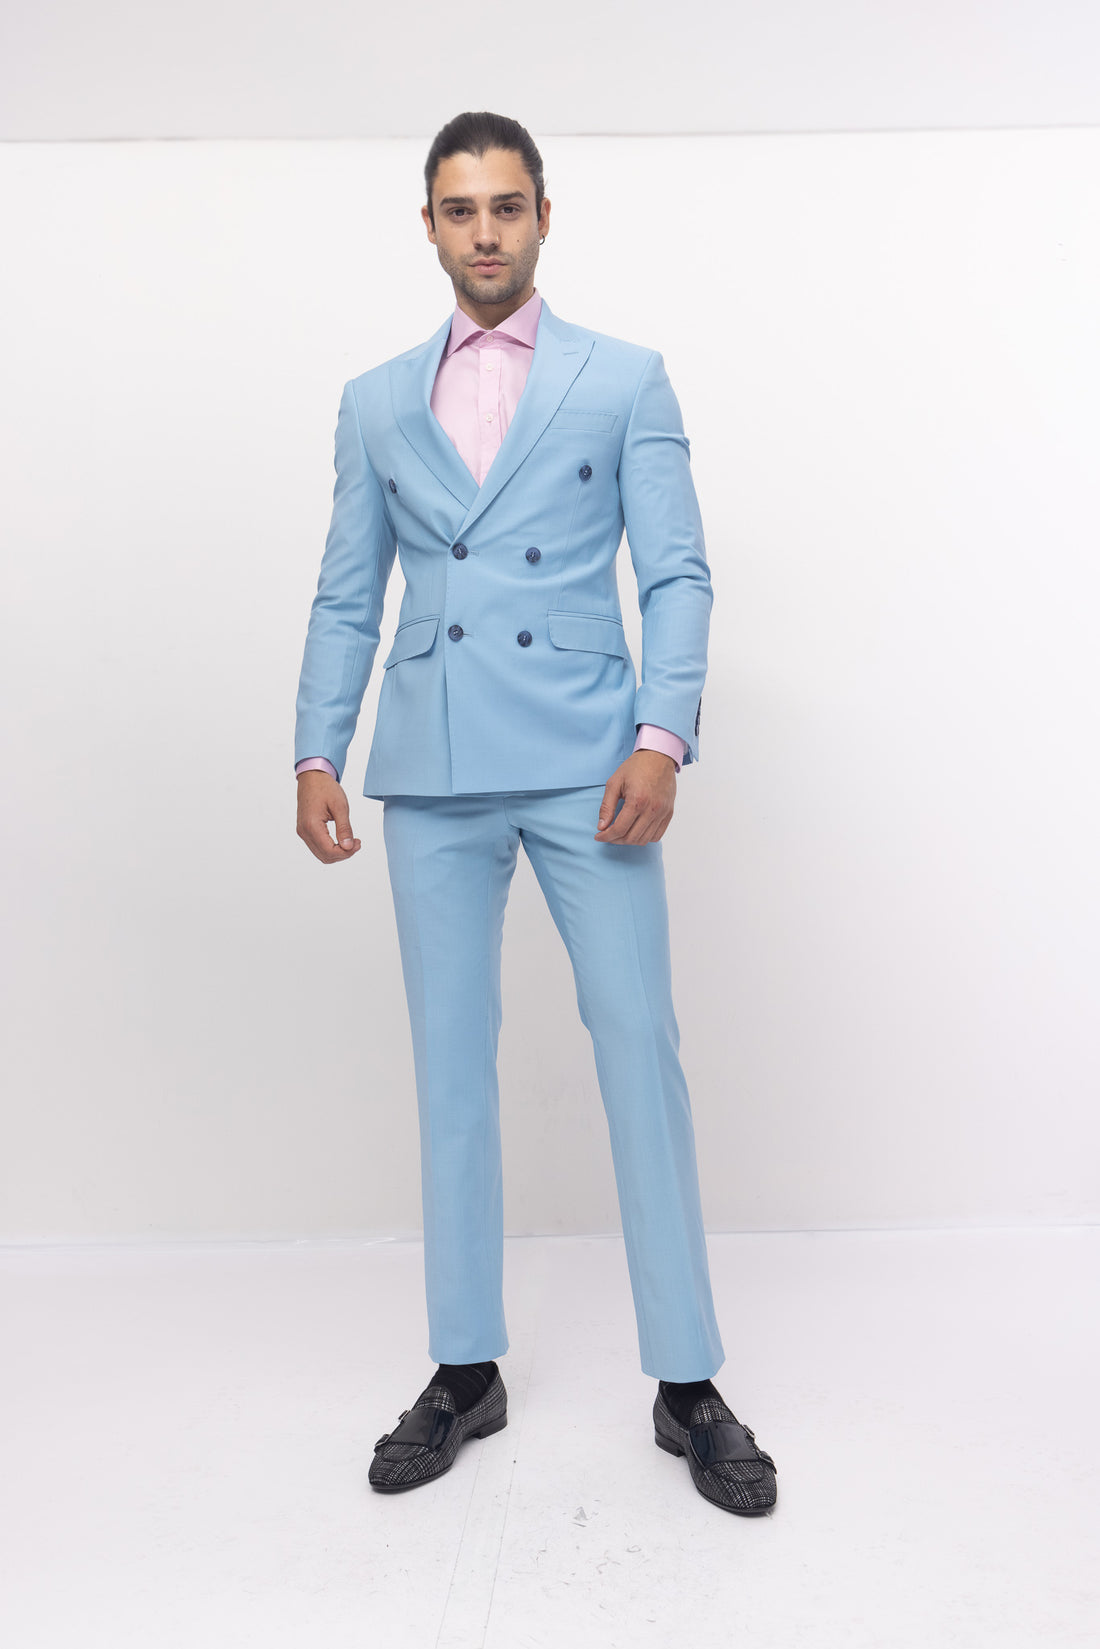 R206 - Double Breasted Suit - Sky Blue - Ron Tomson